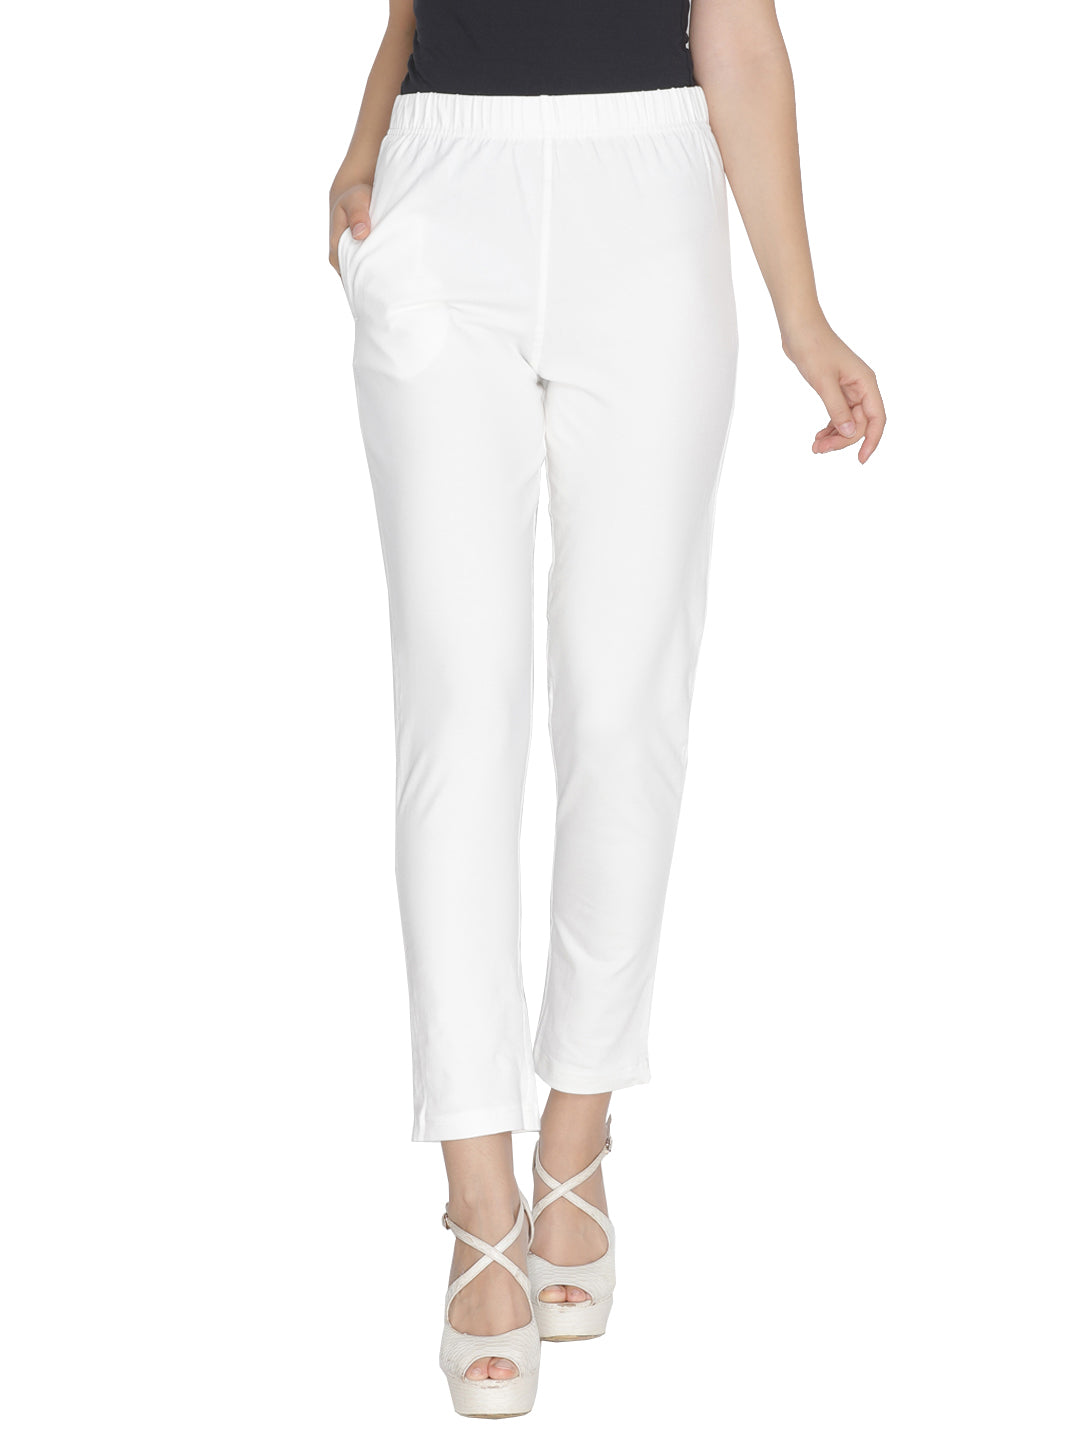 Buy Lux Lyra White Free Size Kurti Pant Online In India At Discounted Prices